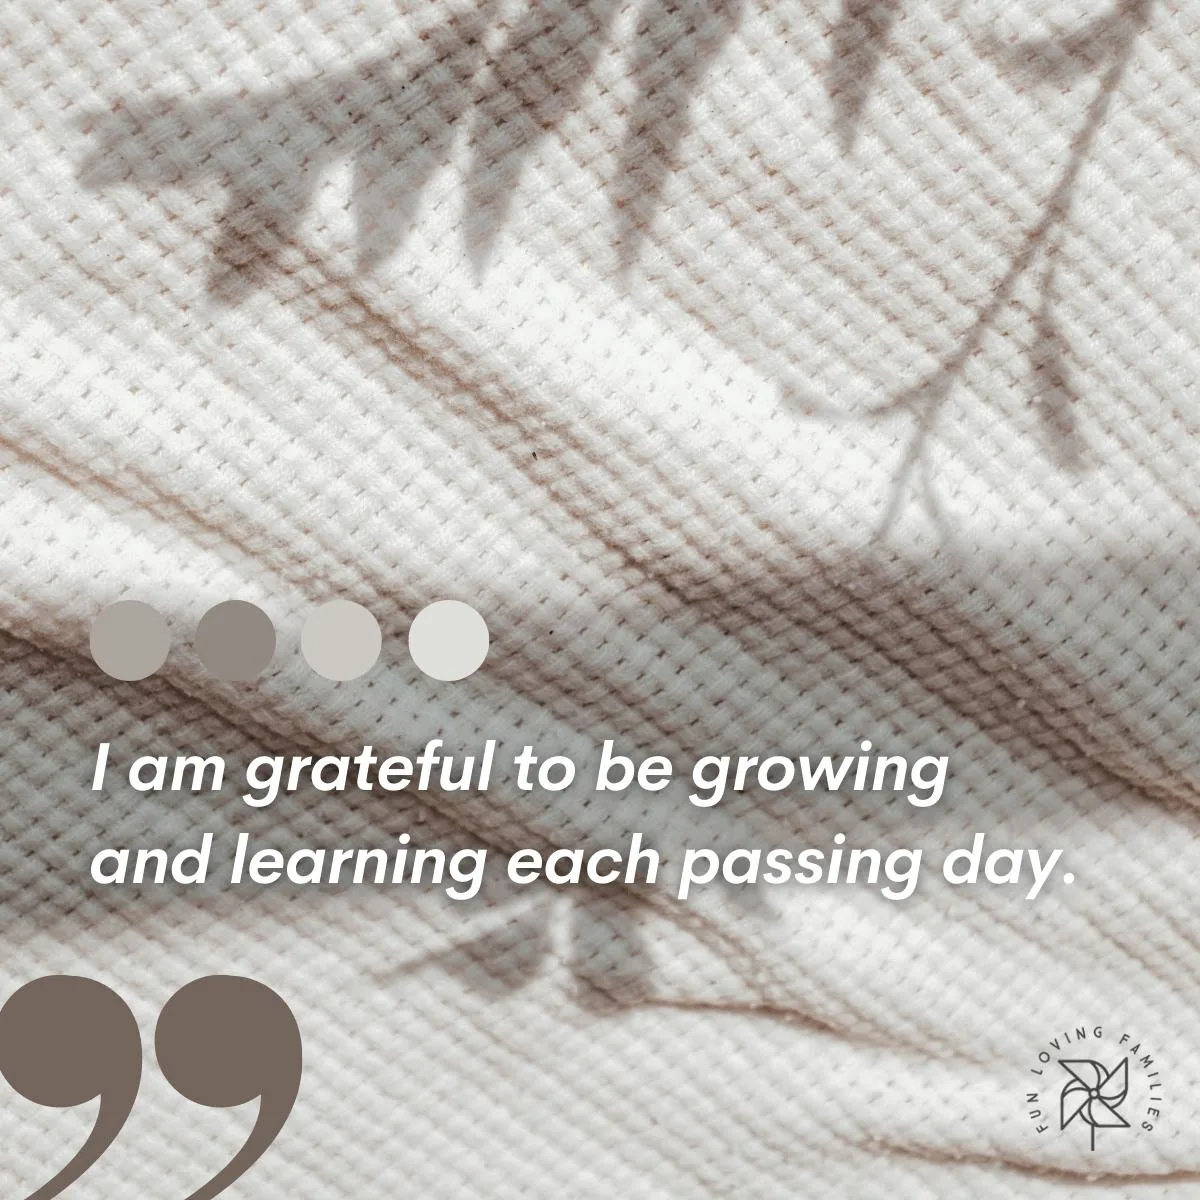 I am grateful to be growing and learning each passing day affirmation